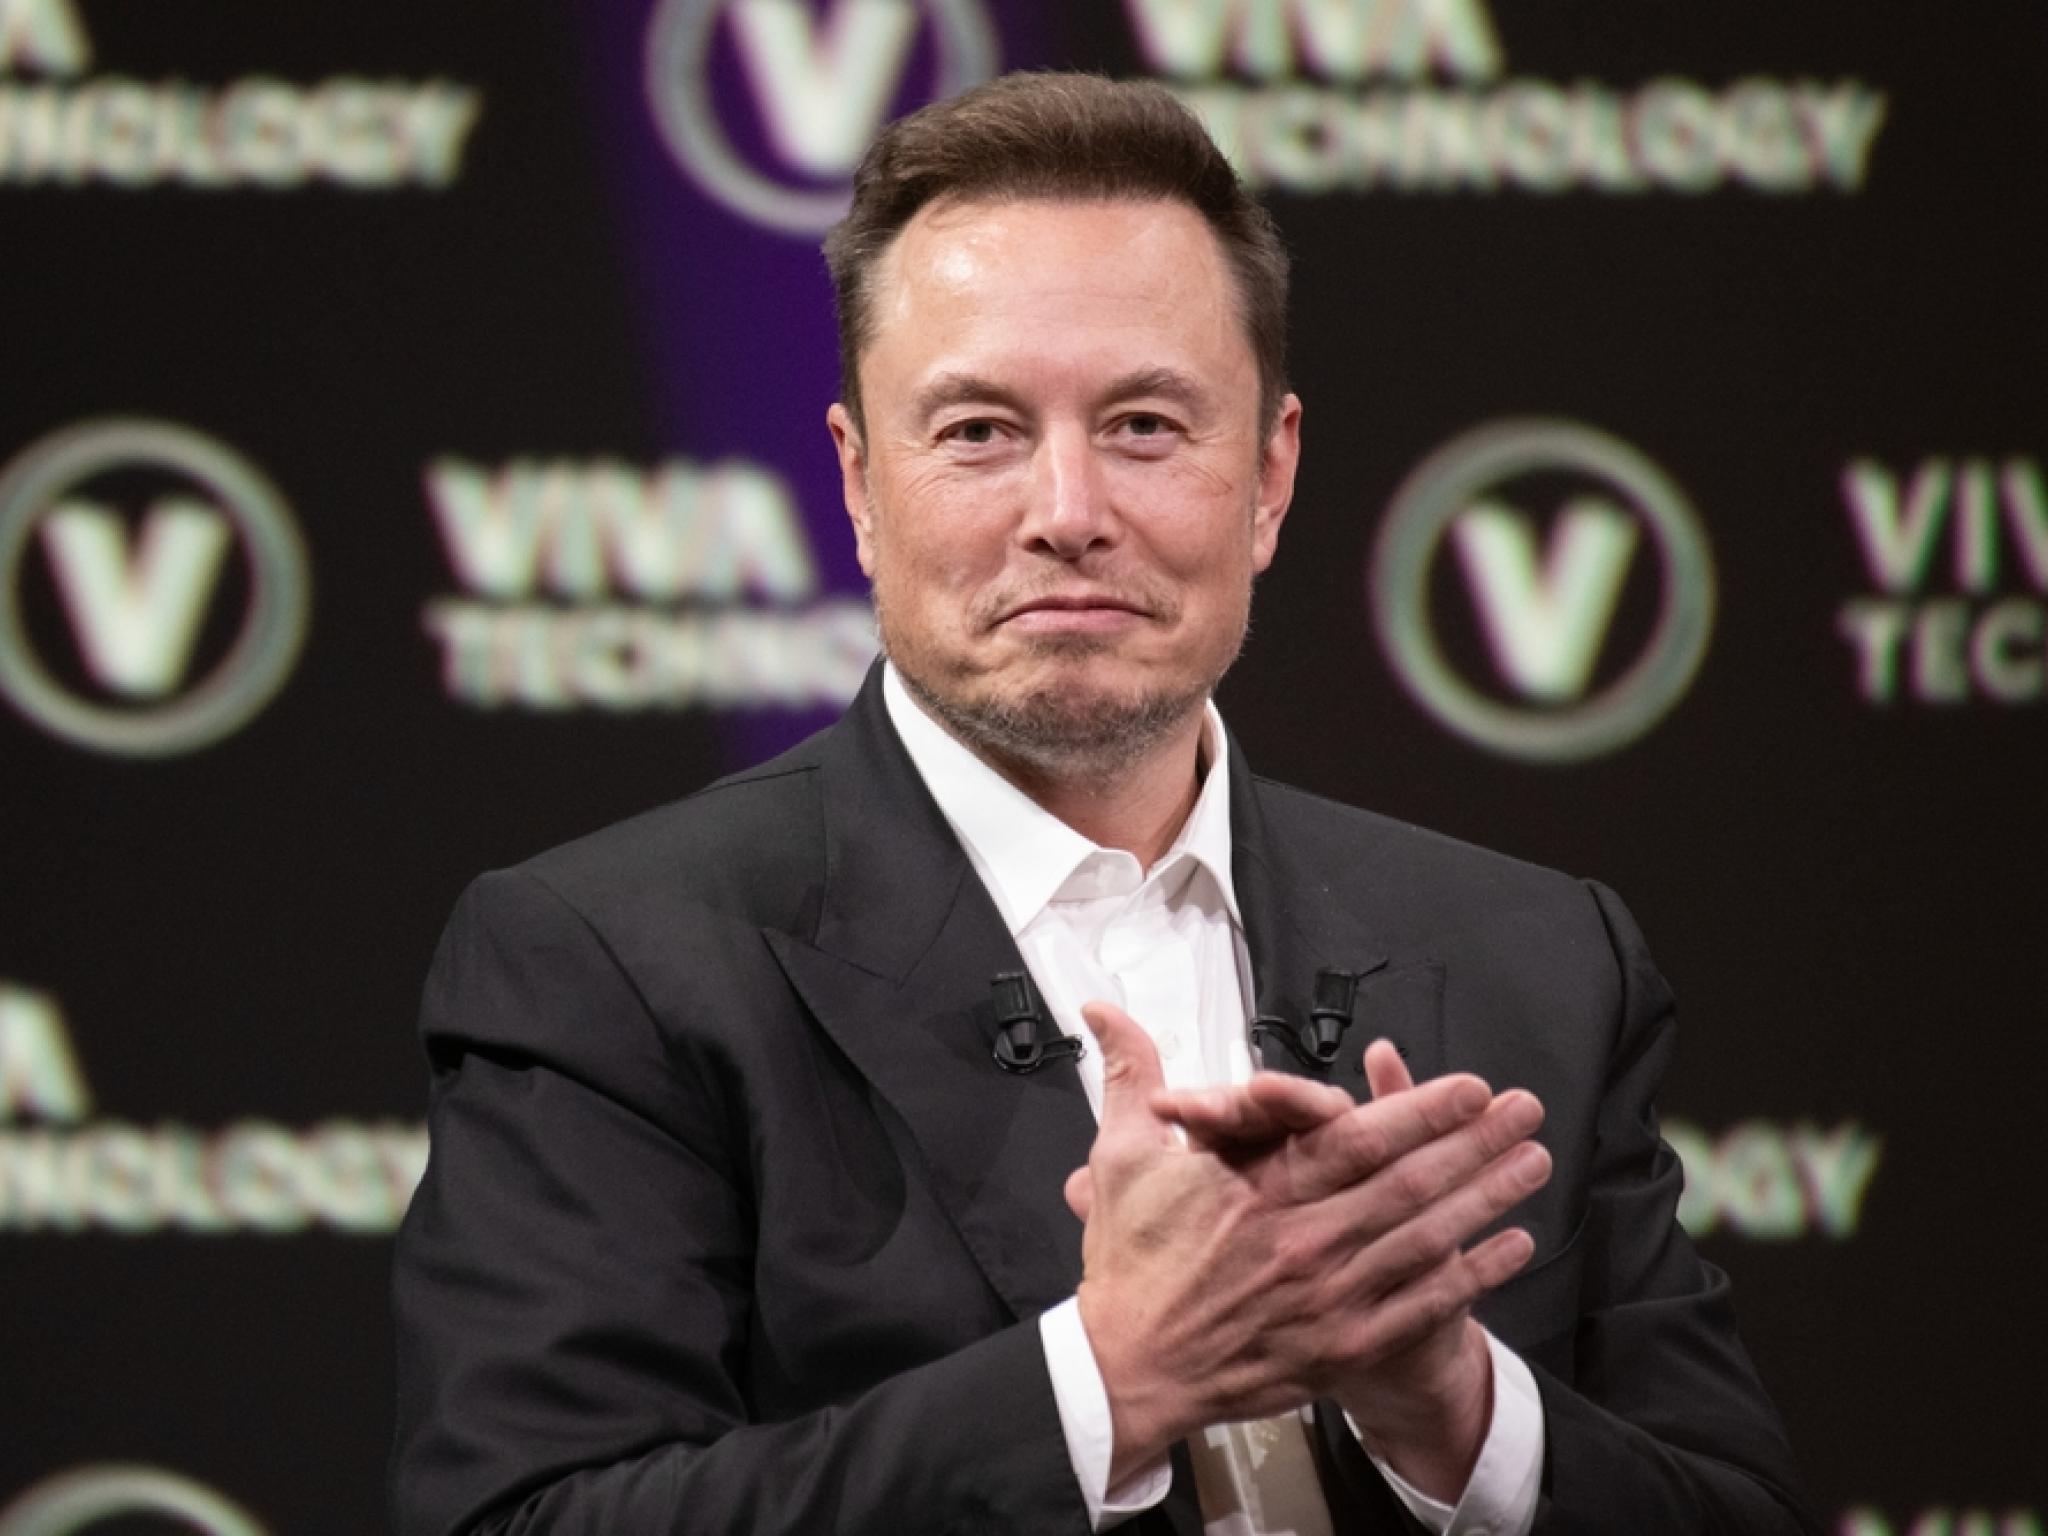  elon-musk-reignites-quora-debate-calls-it-1-in-pretentiousness-in-response-to-a-viral-rant 